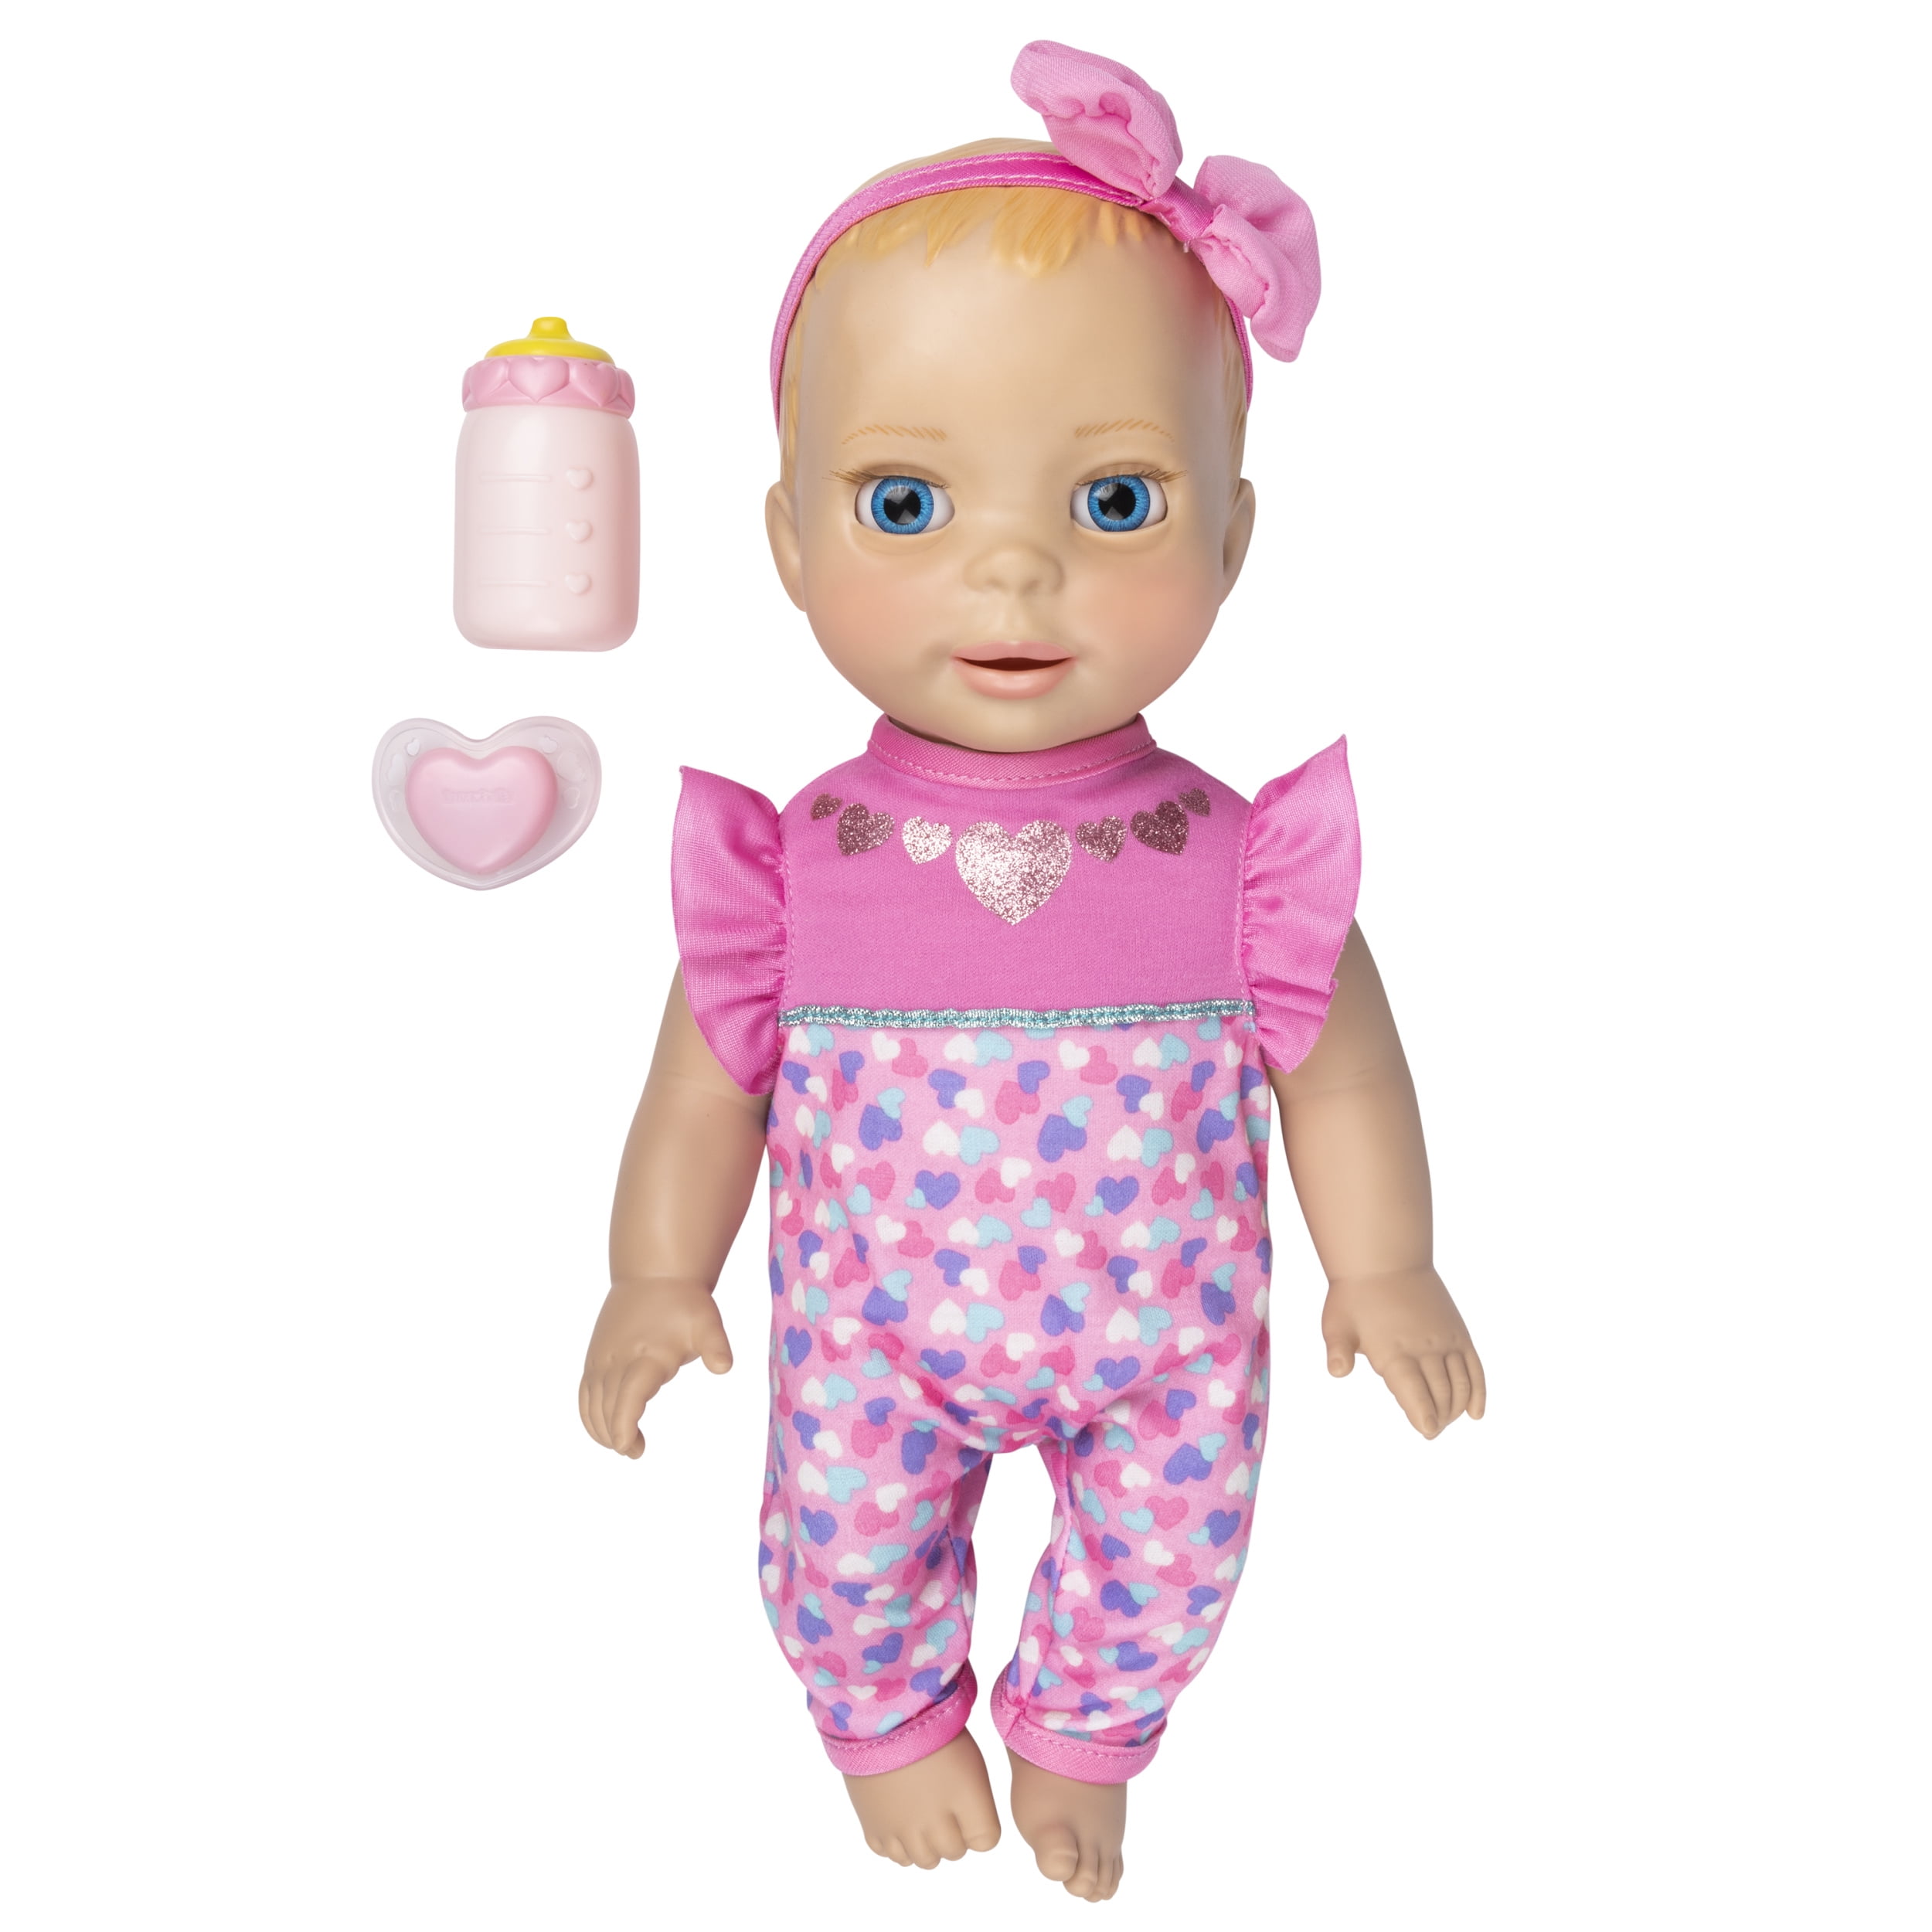 Interactive Baby Doll with Real Blonde Hair Luvabella 6047317 Newborn 